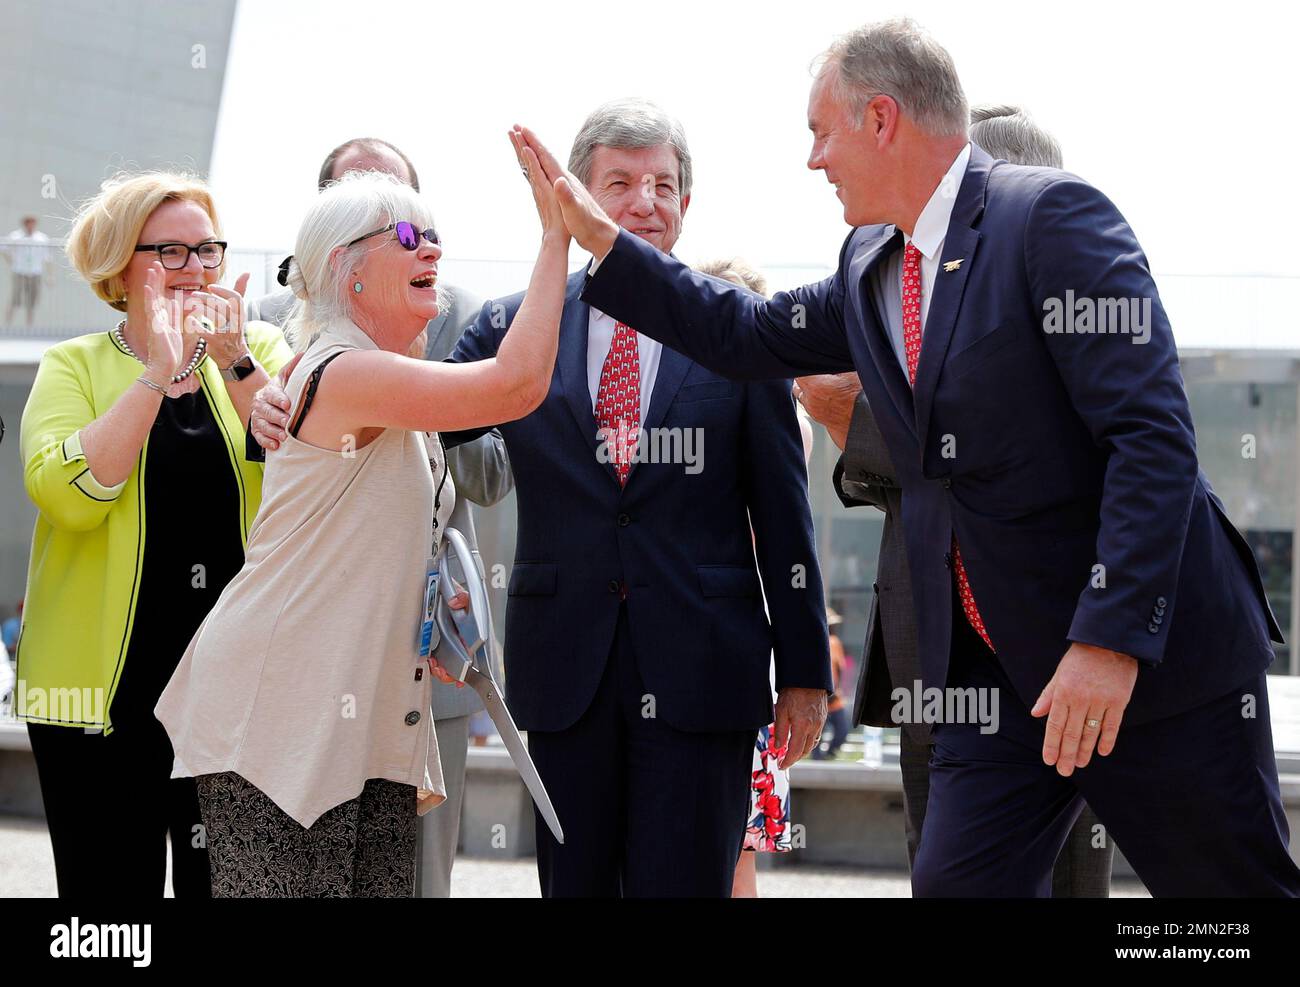 Susan Saarinen, daughter of Gateway Arch architect Eero Saarinen, is  congratulated by U.S. Interior Secretary Ryan Zinke, right, as U.S. Sens.  Claire McCaskill, left, and Roy Blunt, second from right, watch after